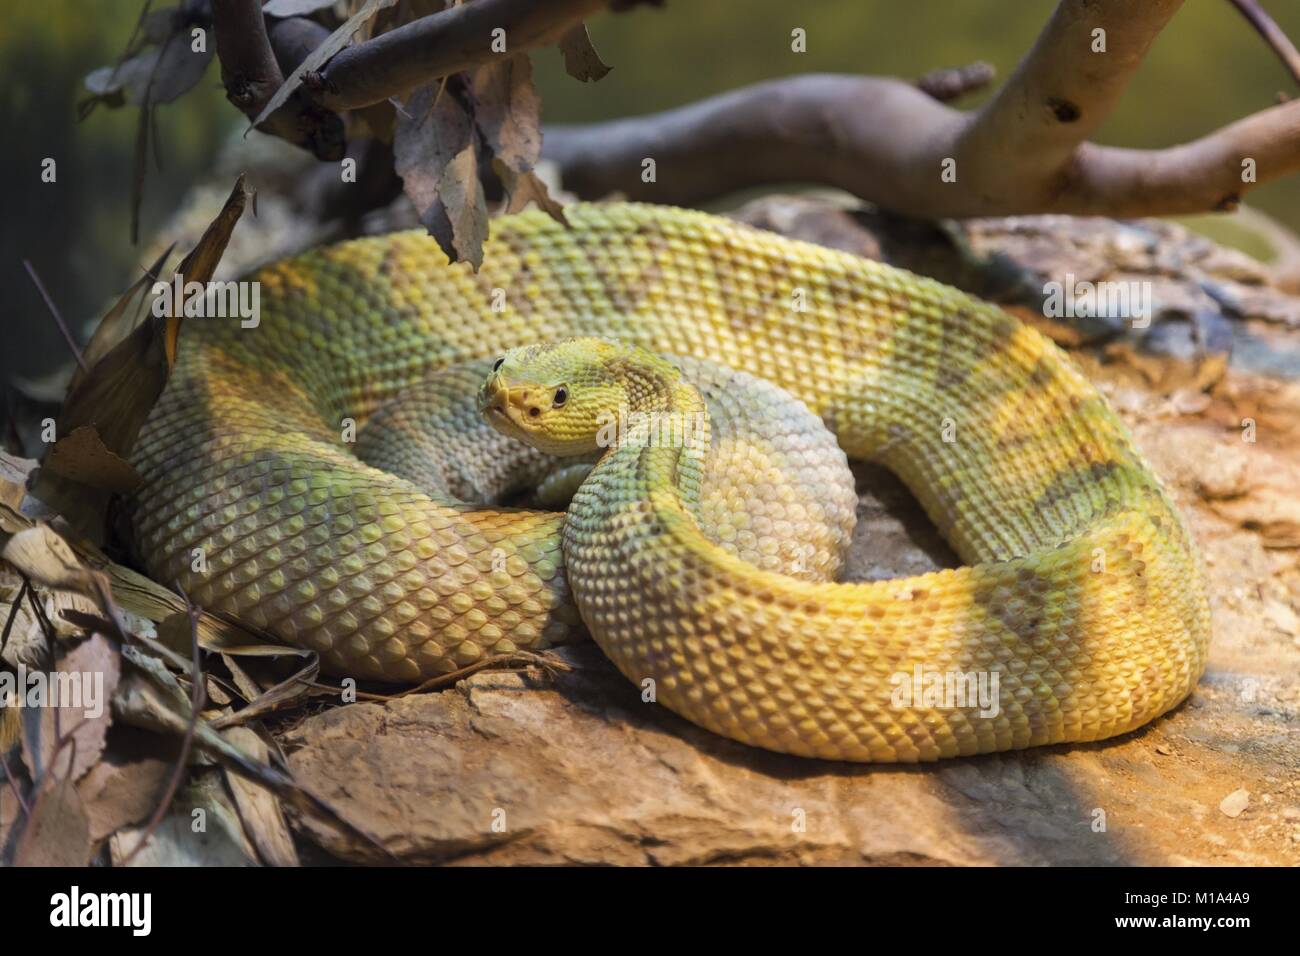 Curled Up Neotropical Rattlesnake (Crotalus Simus, Central American Rattlesnake), a venomous pit viper curled up in Reptile House in San Diego Zoo Stock Photo